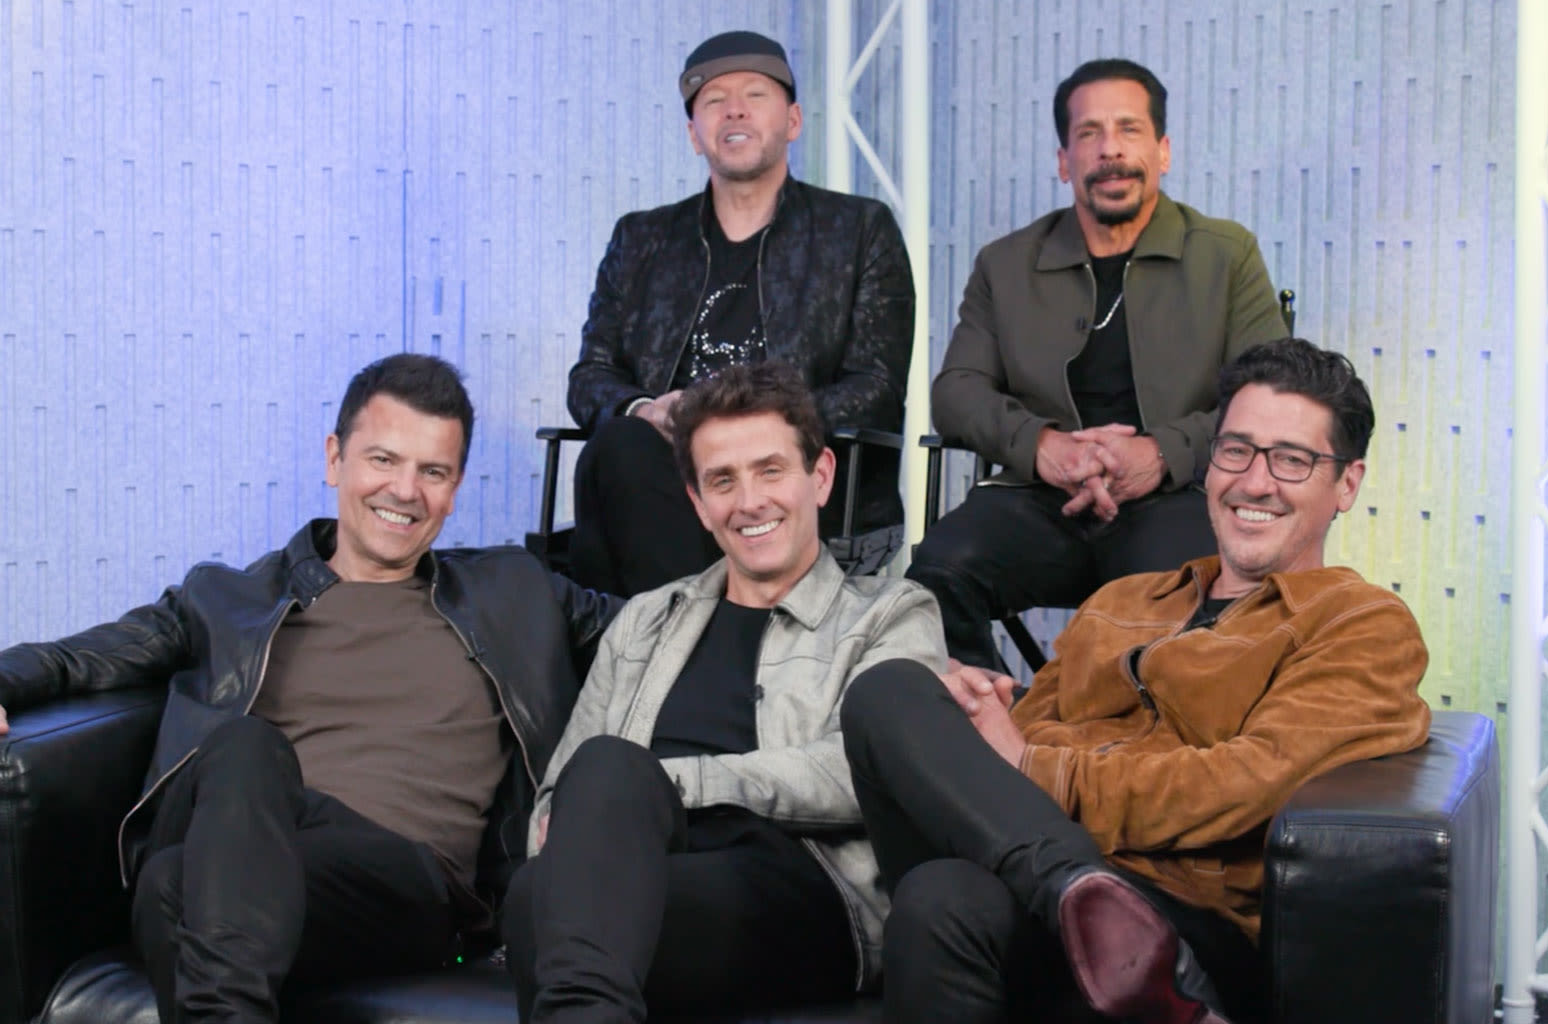 New Kids On the Block’s ‘Still Kids’ Debuts in Top 5 on Album Sales Chart